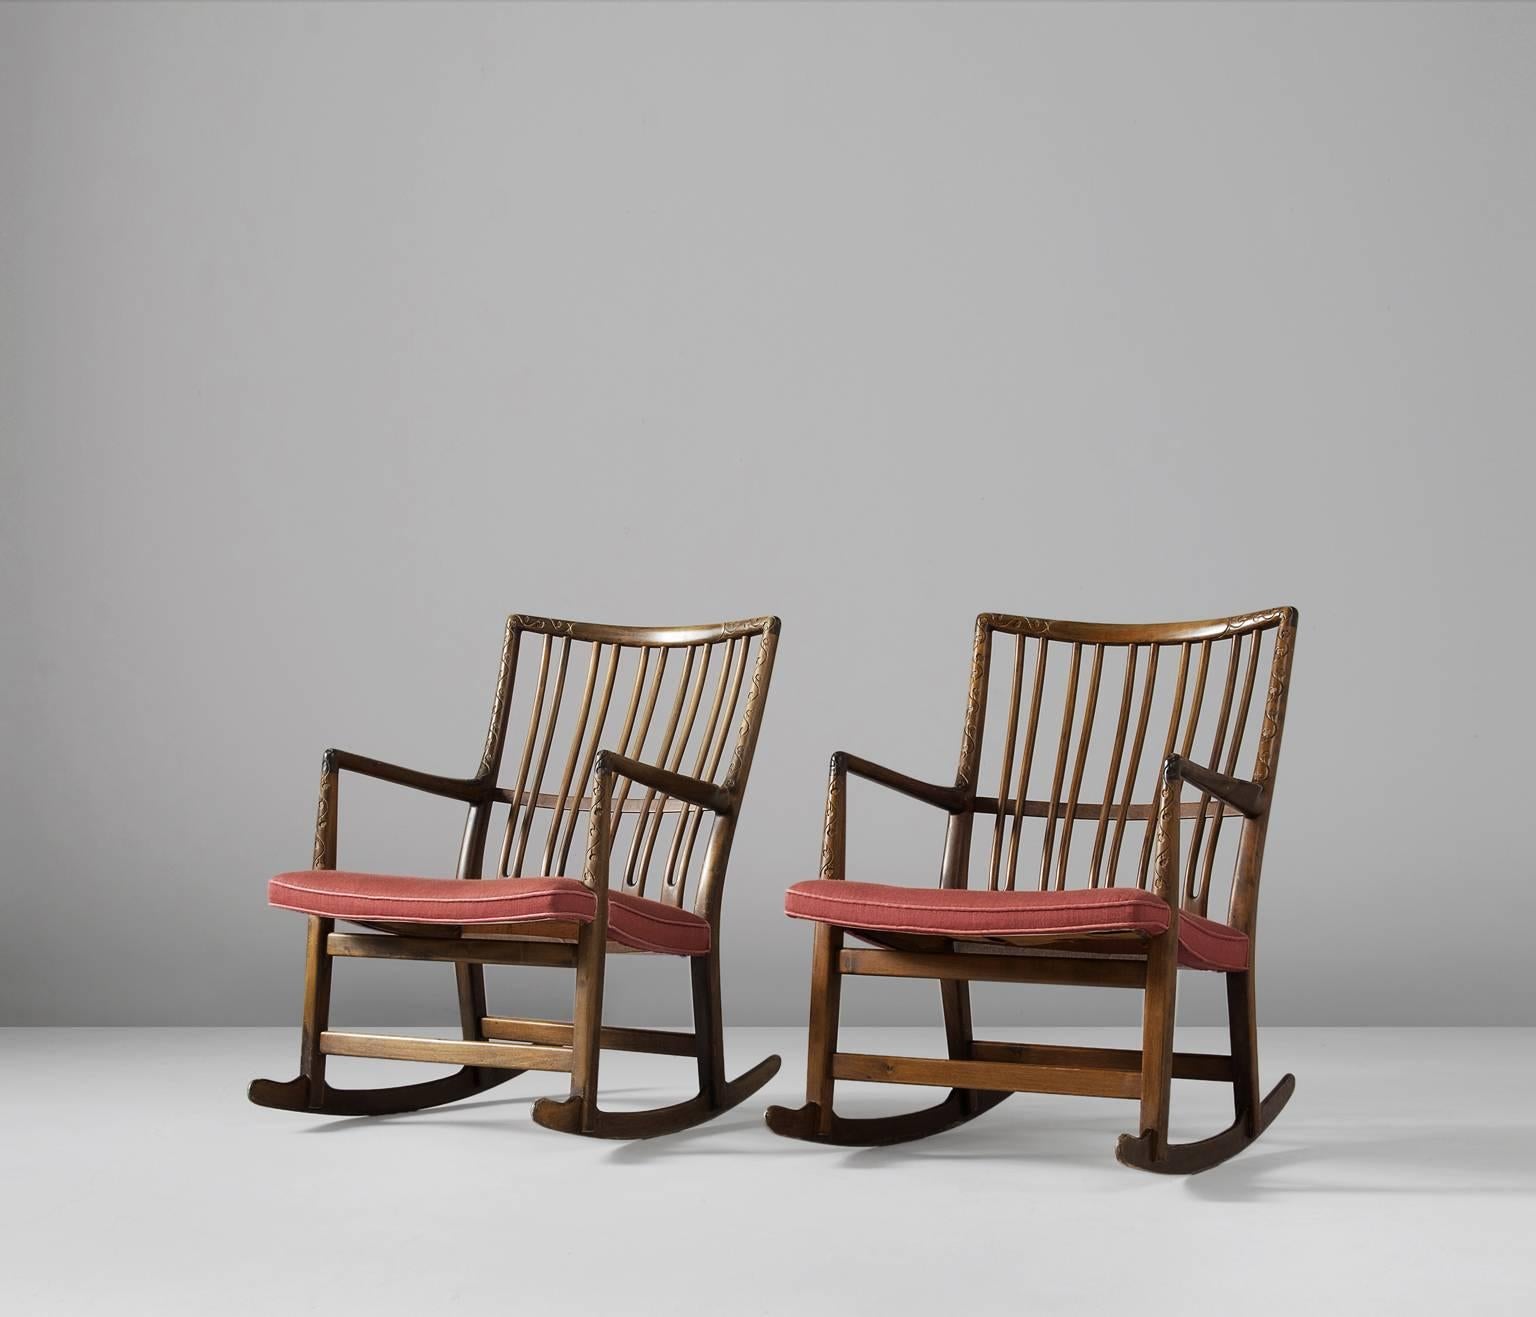 Set of two beech rocking chairs by Hans Wegner, model ML-33, Denmark 1940s. 

These rocking chairs are an early design of Hans Wegner, produced by master-carver and cabinetmaker Mikael Laursen. Model ML-33 is know as the first rocking chair by